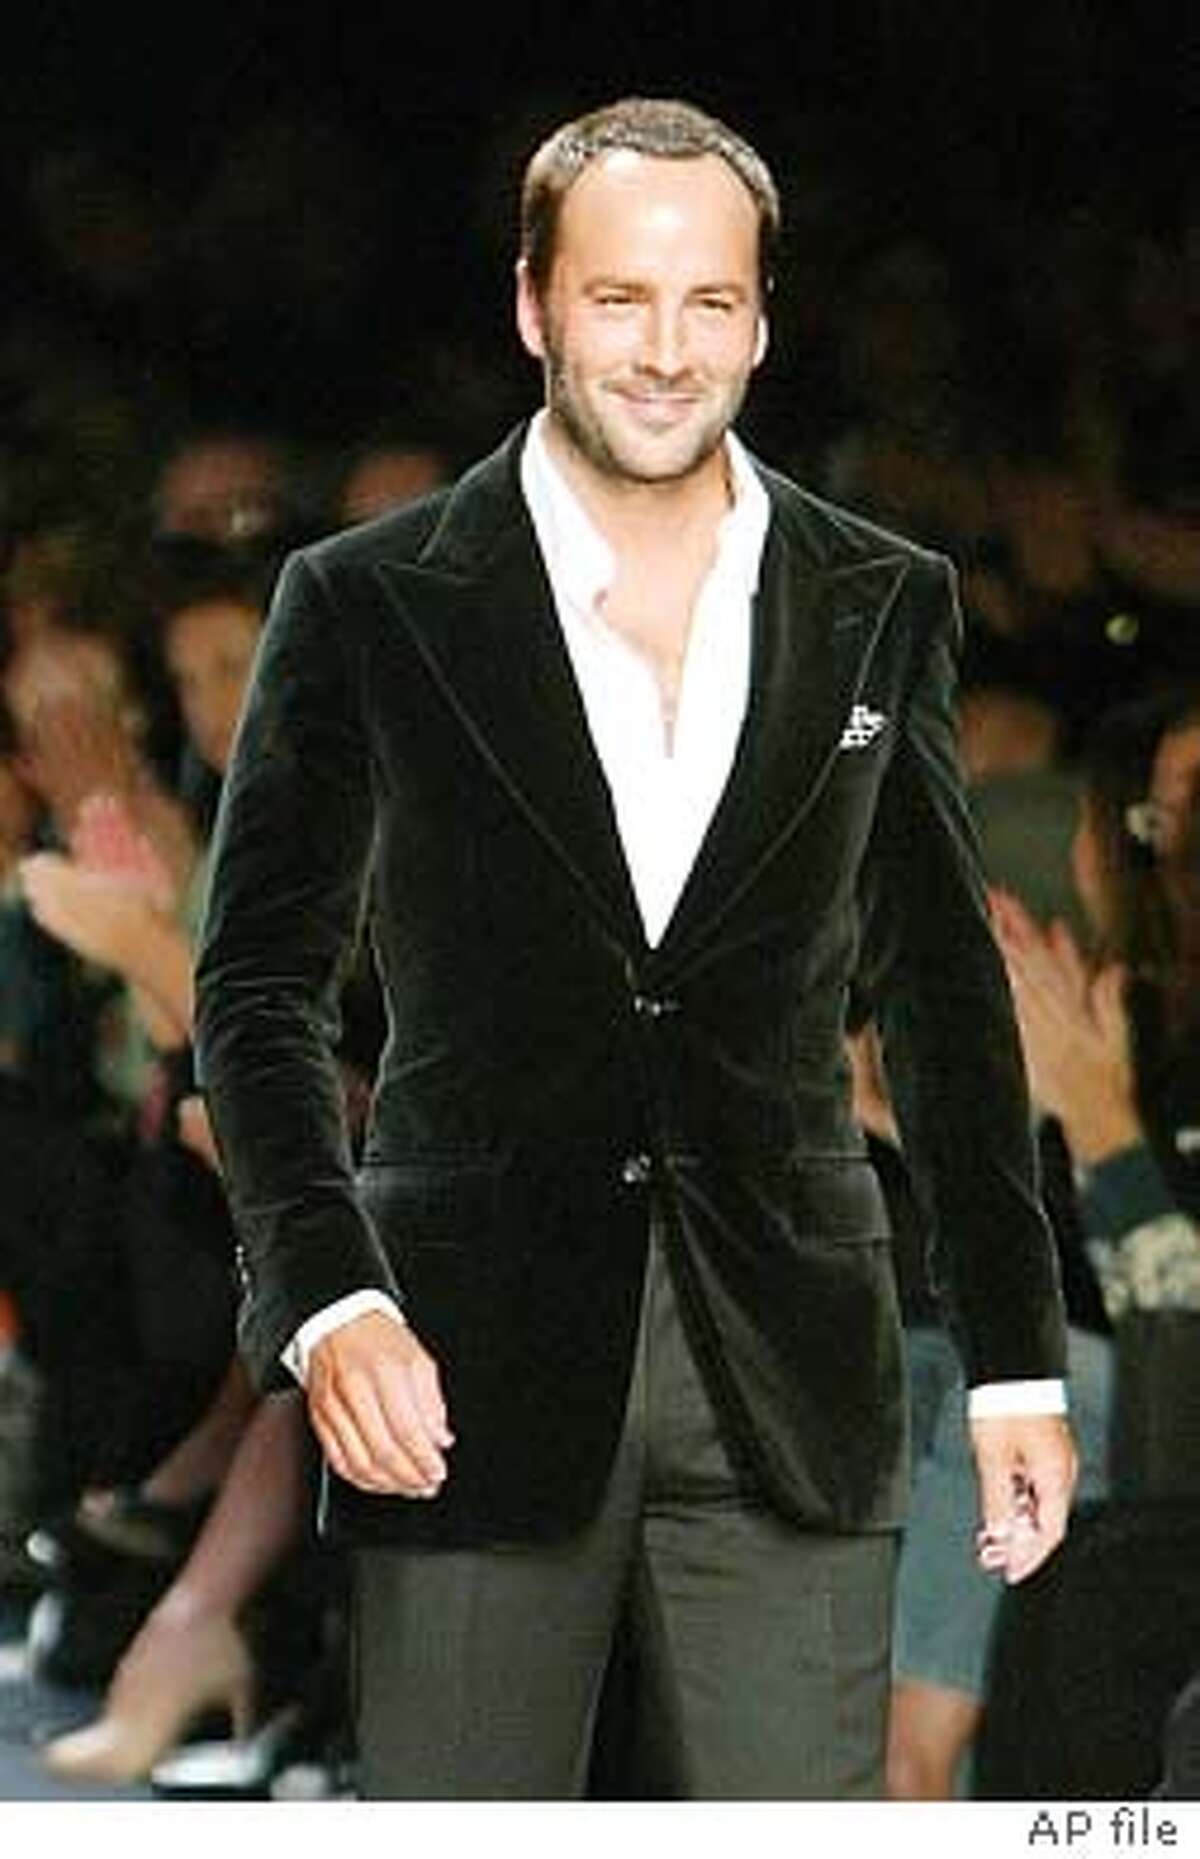 Gucci splits designer / Talks with Tom Ford reportedly failed on issue of creative control